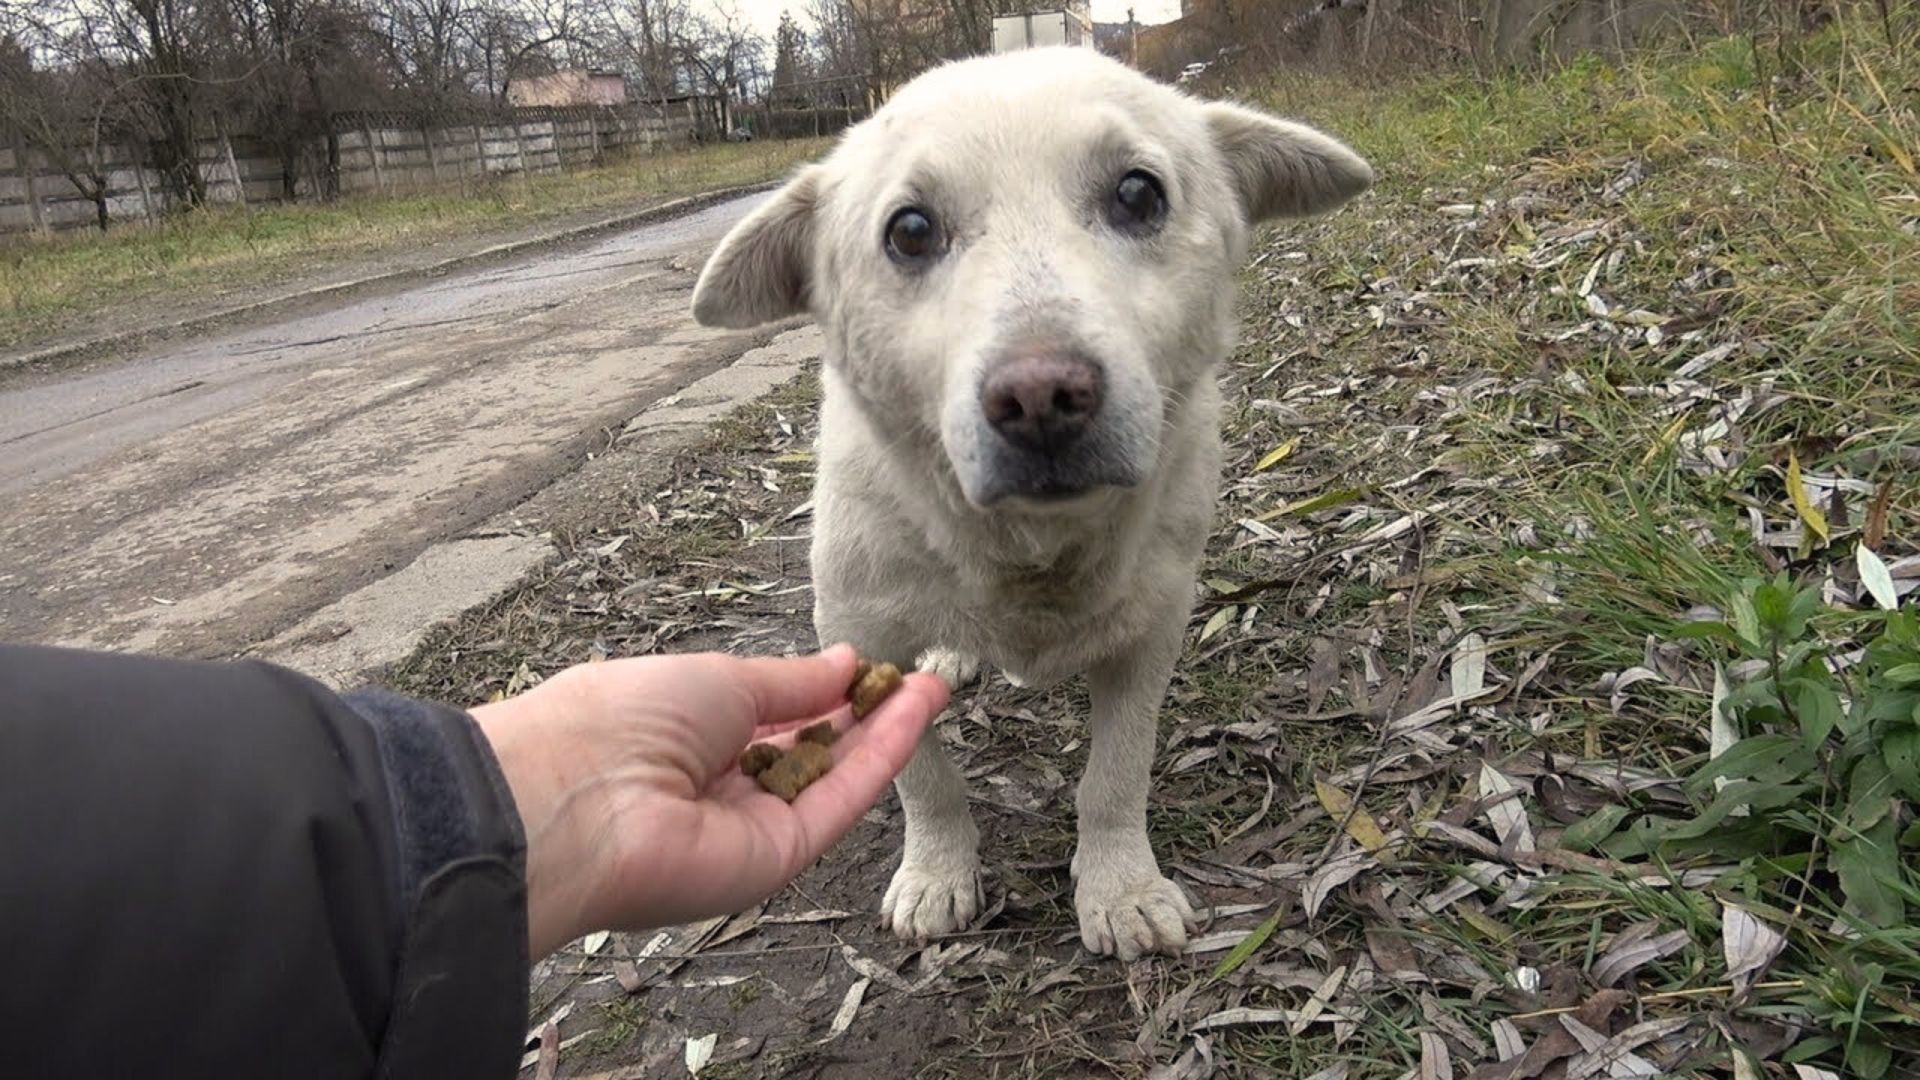 Rescuers Save A Frightened And Heartbroken Stray Pup Who Was Living Near The Railroad